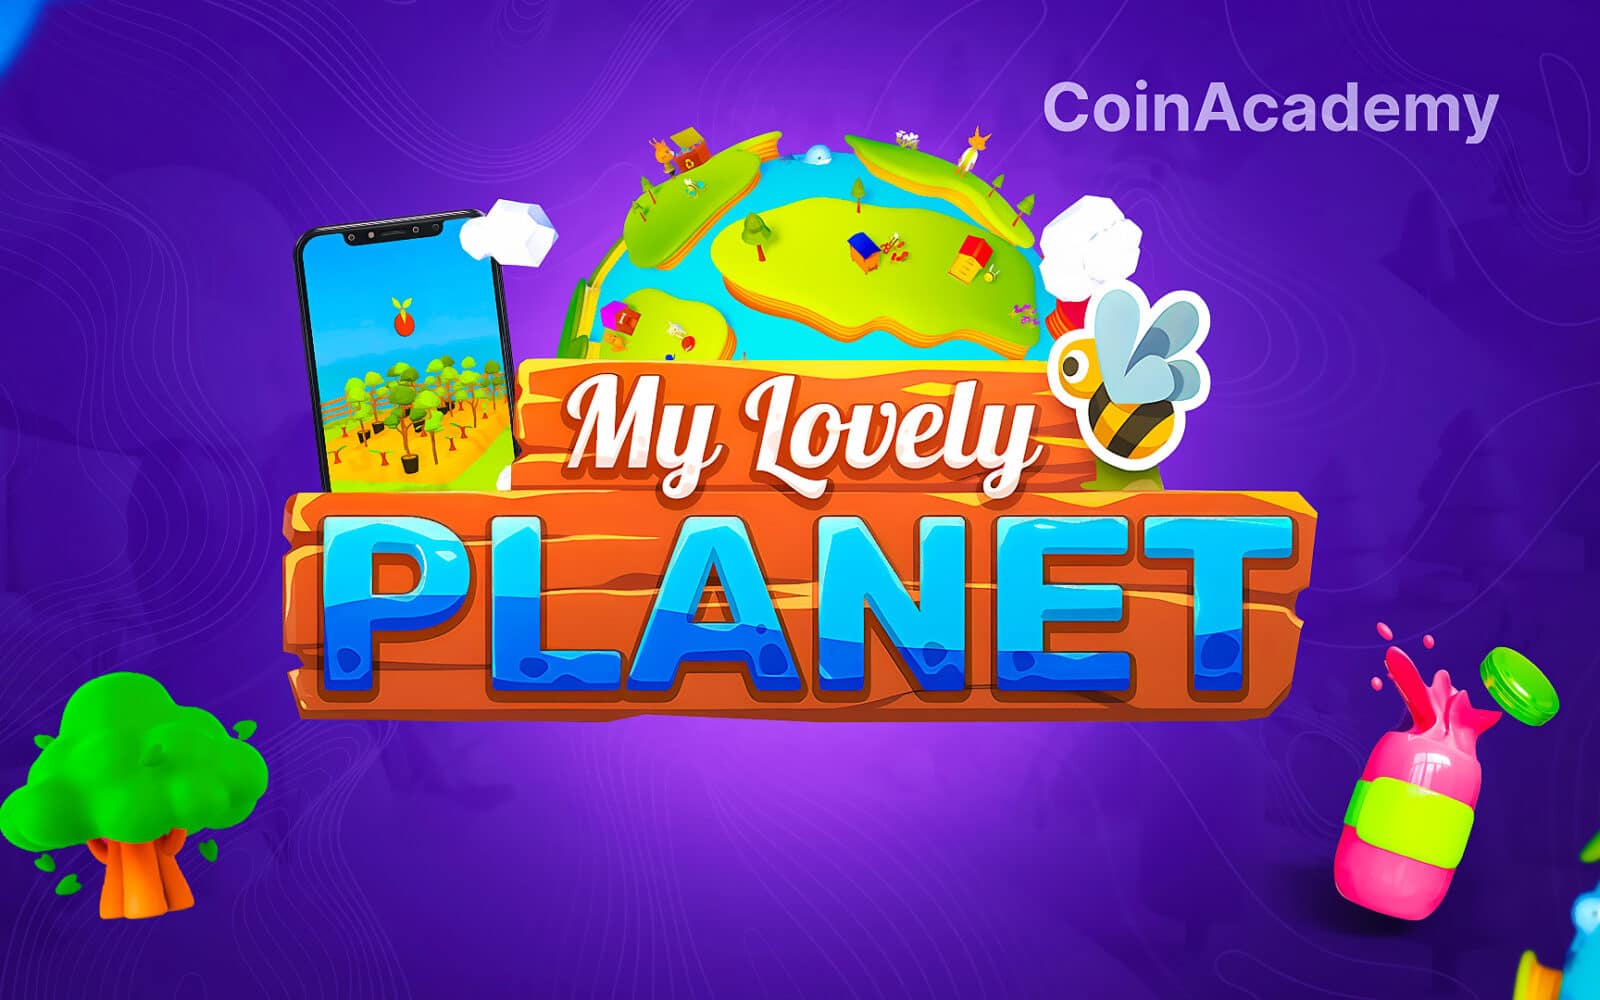 My-lovely-planet